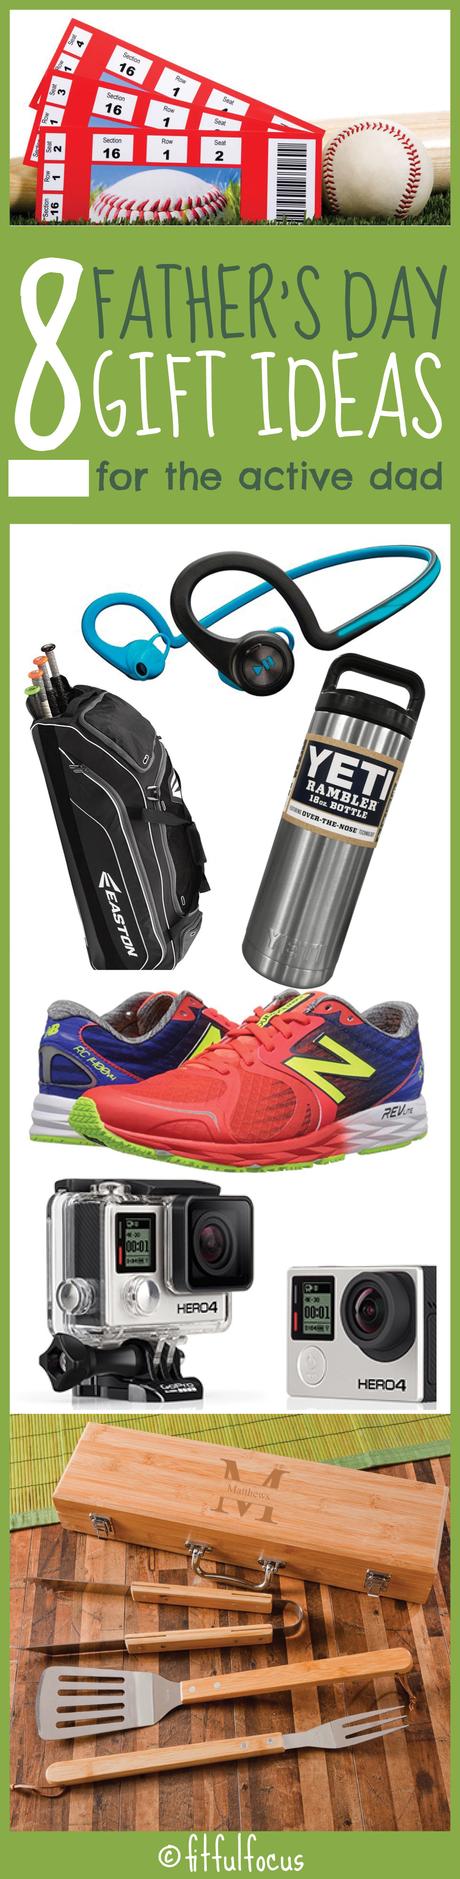 8 Father’s Day Gift Ideas For Your Active Dad